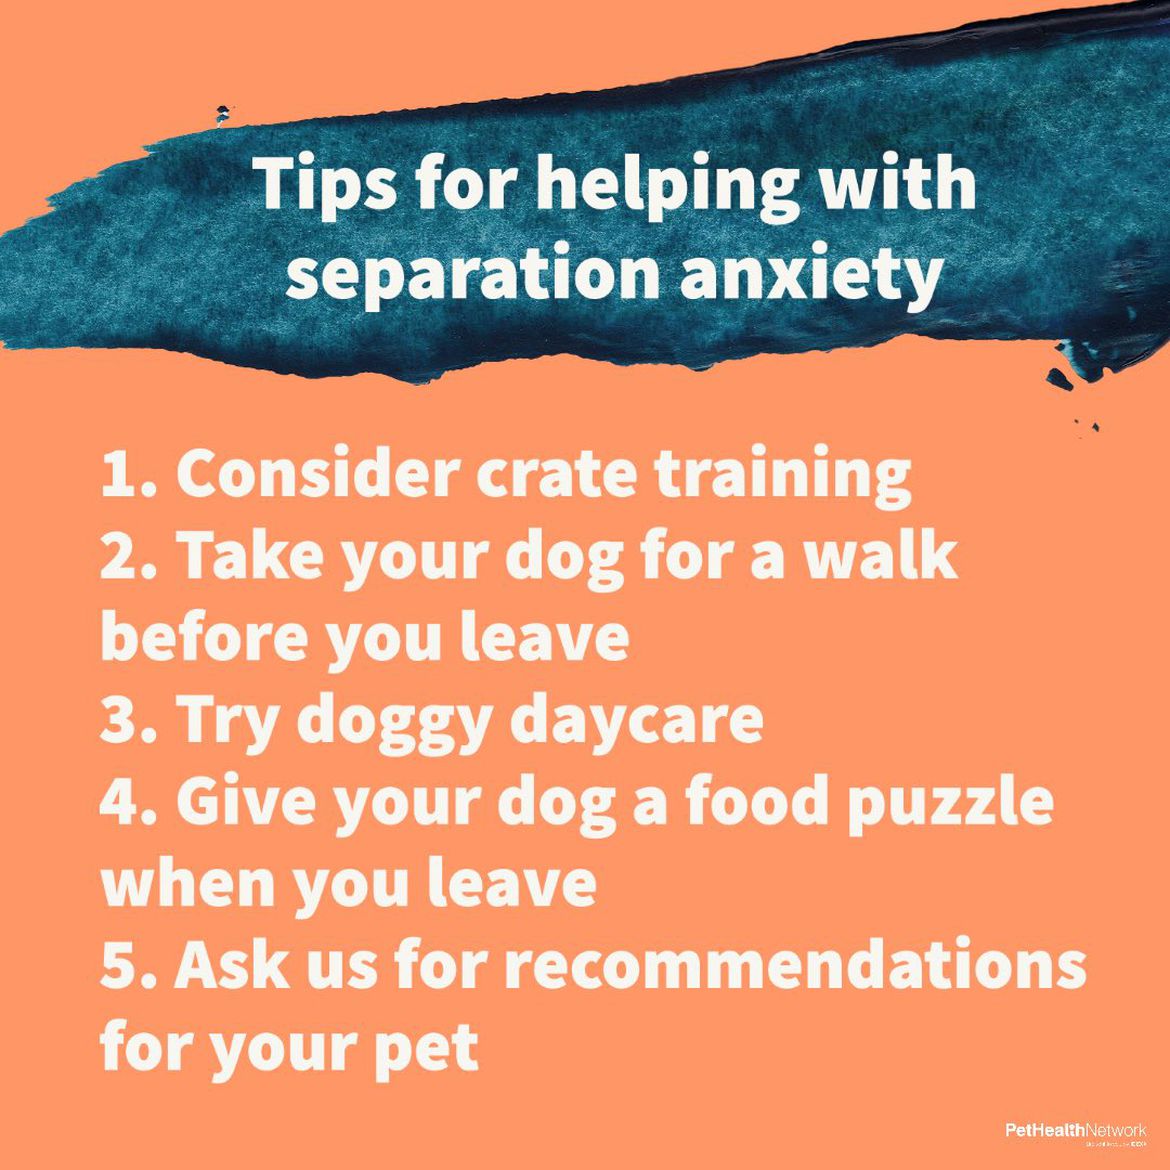 Social media post helping clients with pets with separation anxiety.